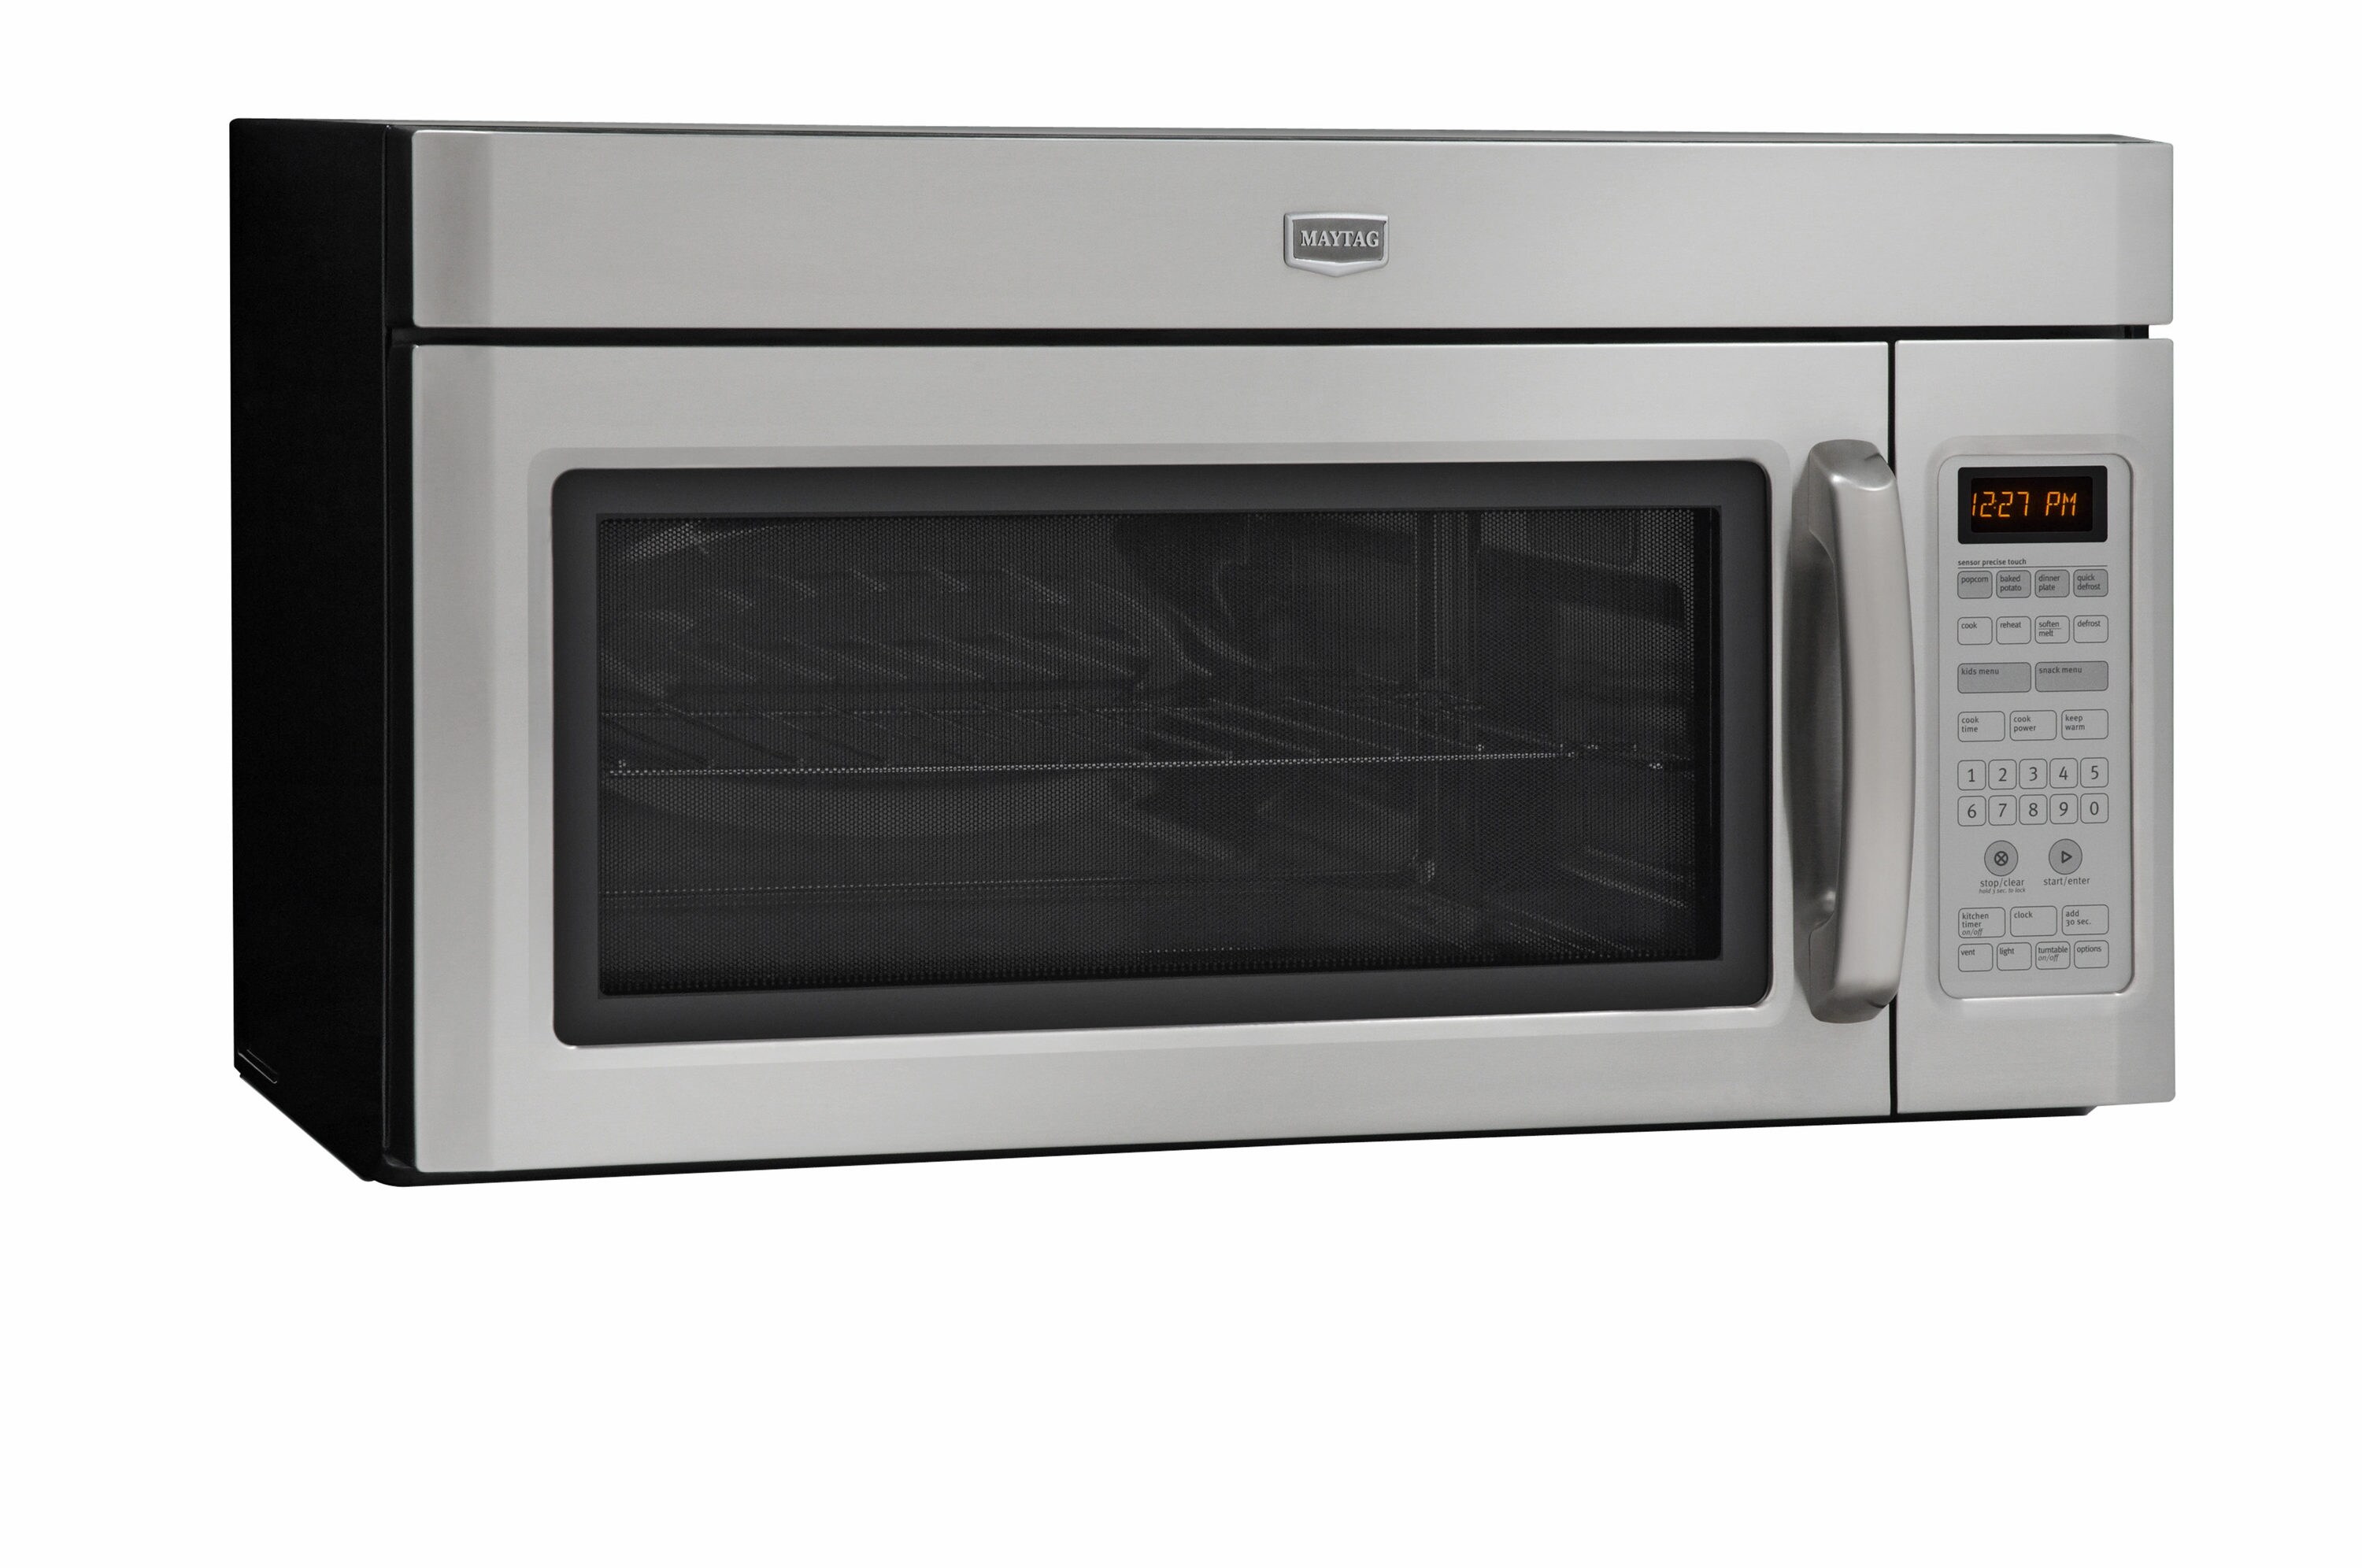 Maytag Stainless Steel Over The Range Microwave / Maytag 0 8 Cu Ft